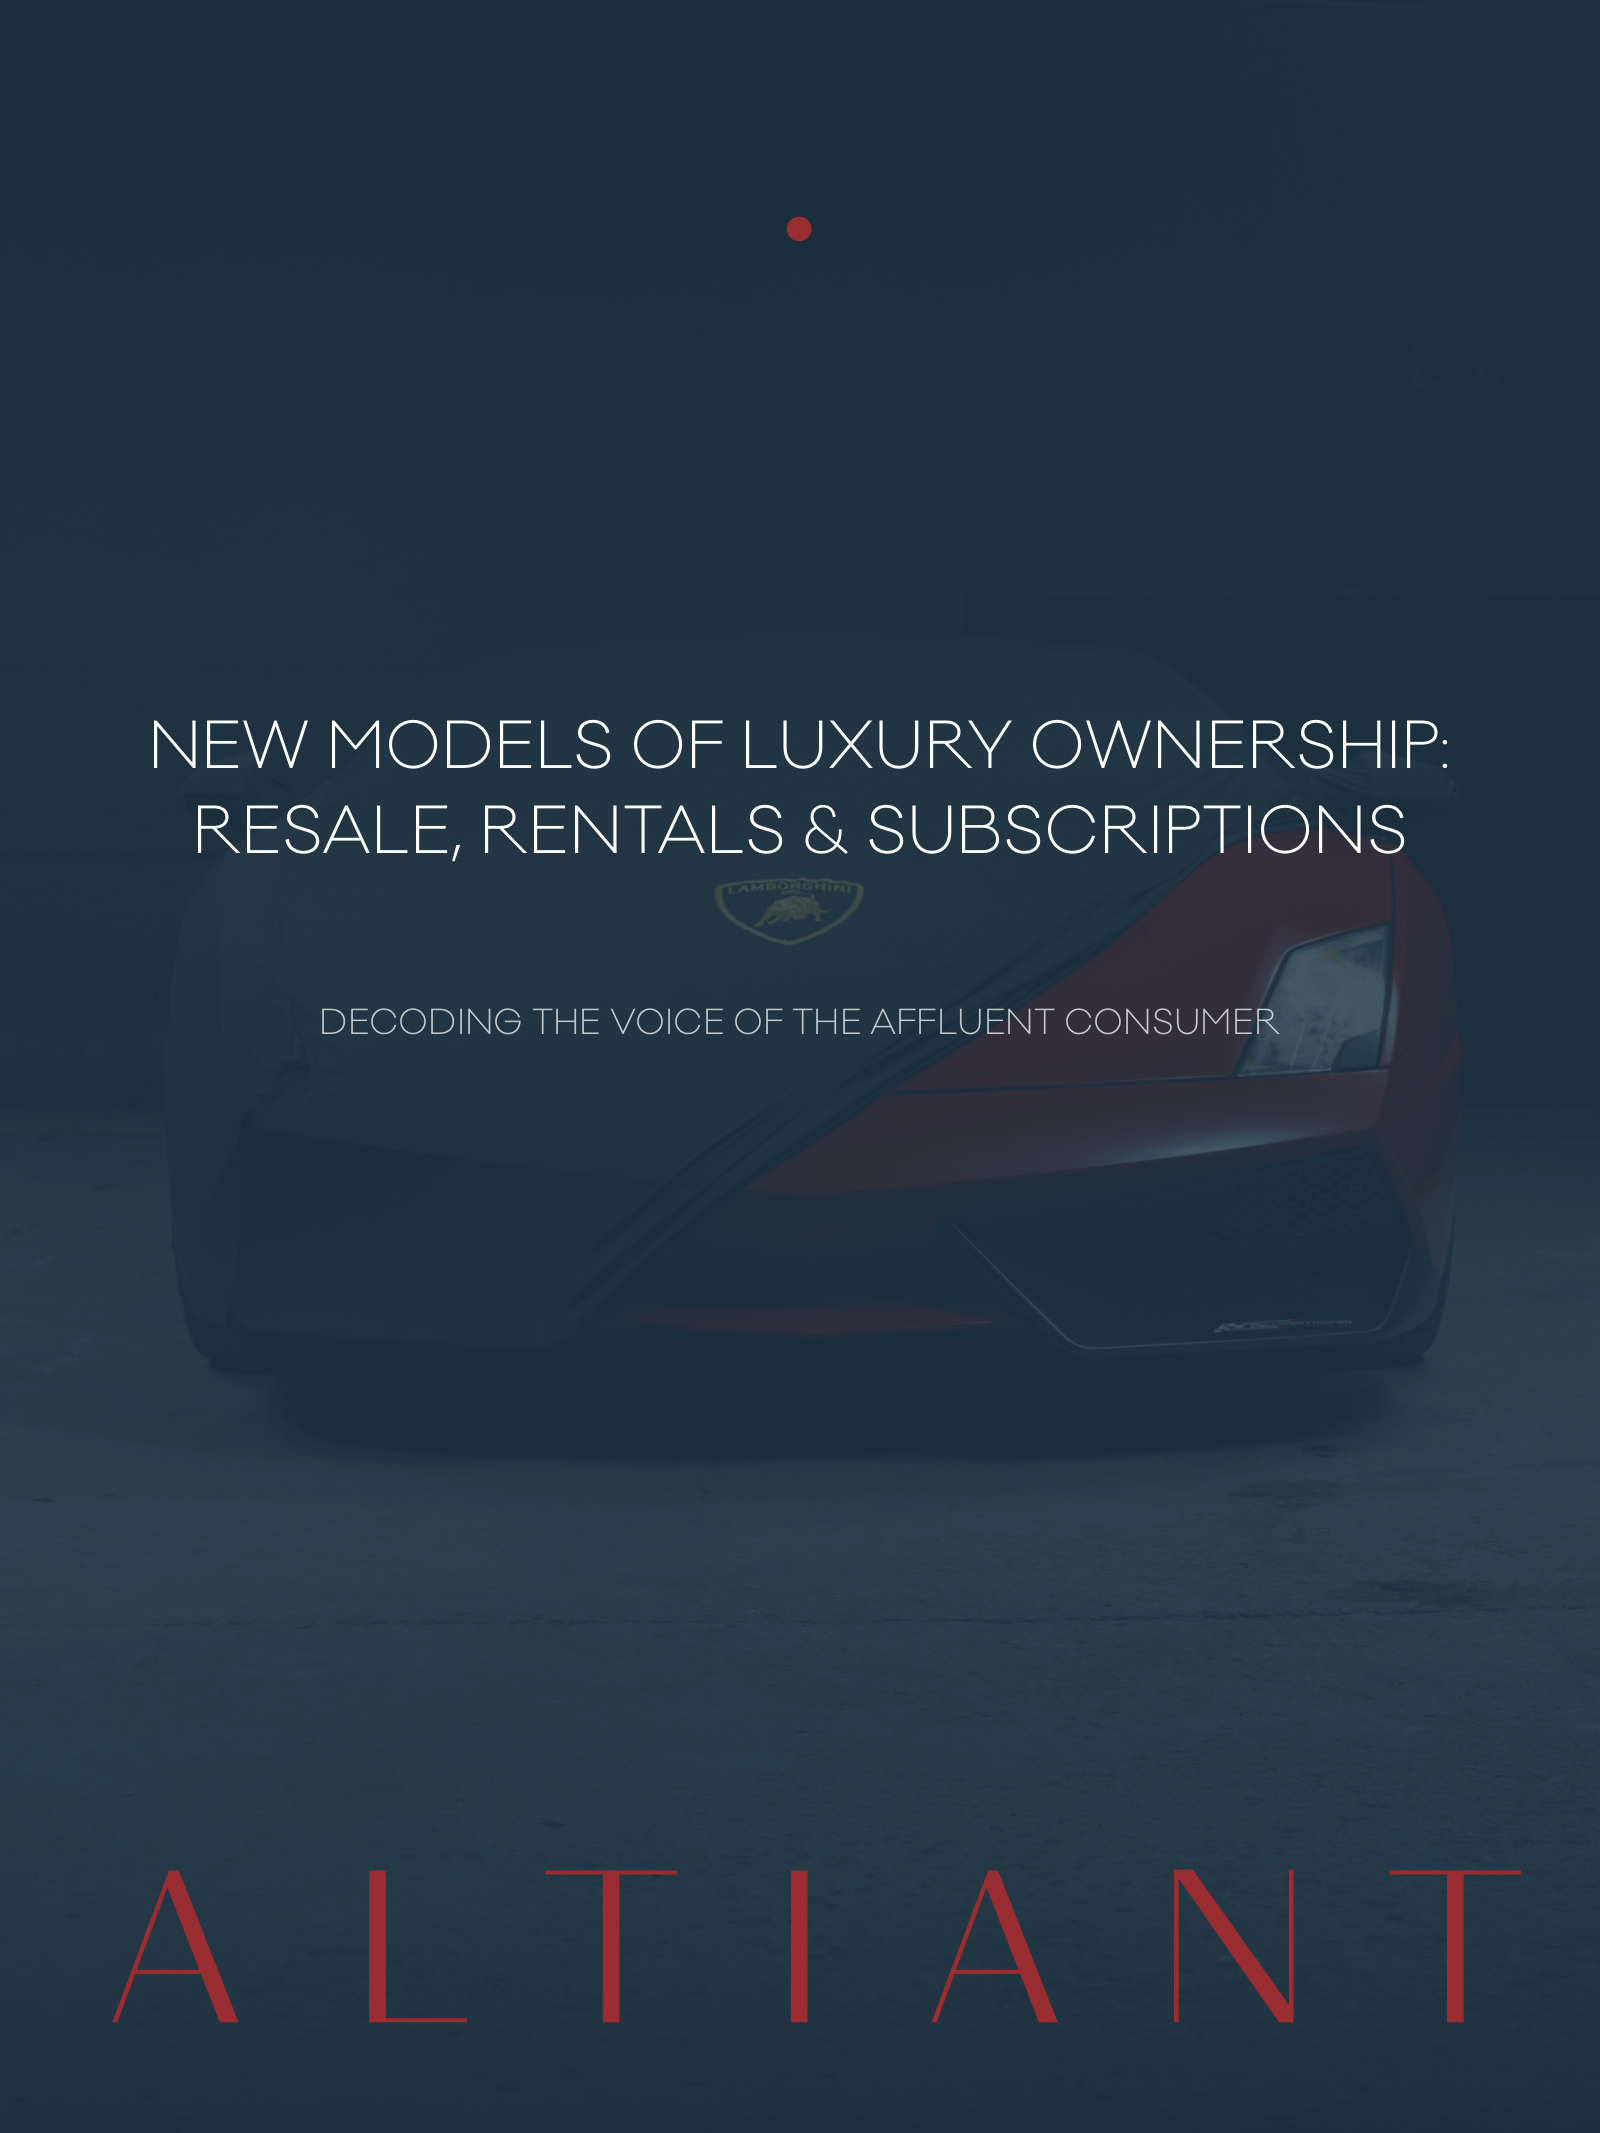 ALTIANT-How do Wealthy Consumers view Reuse, Rental and